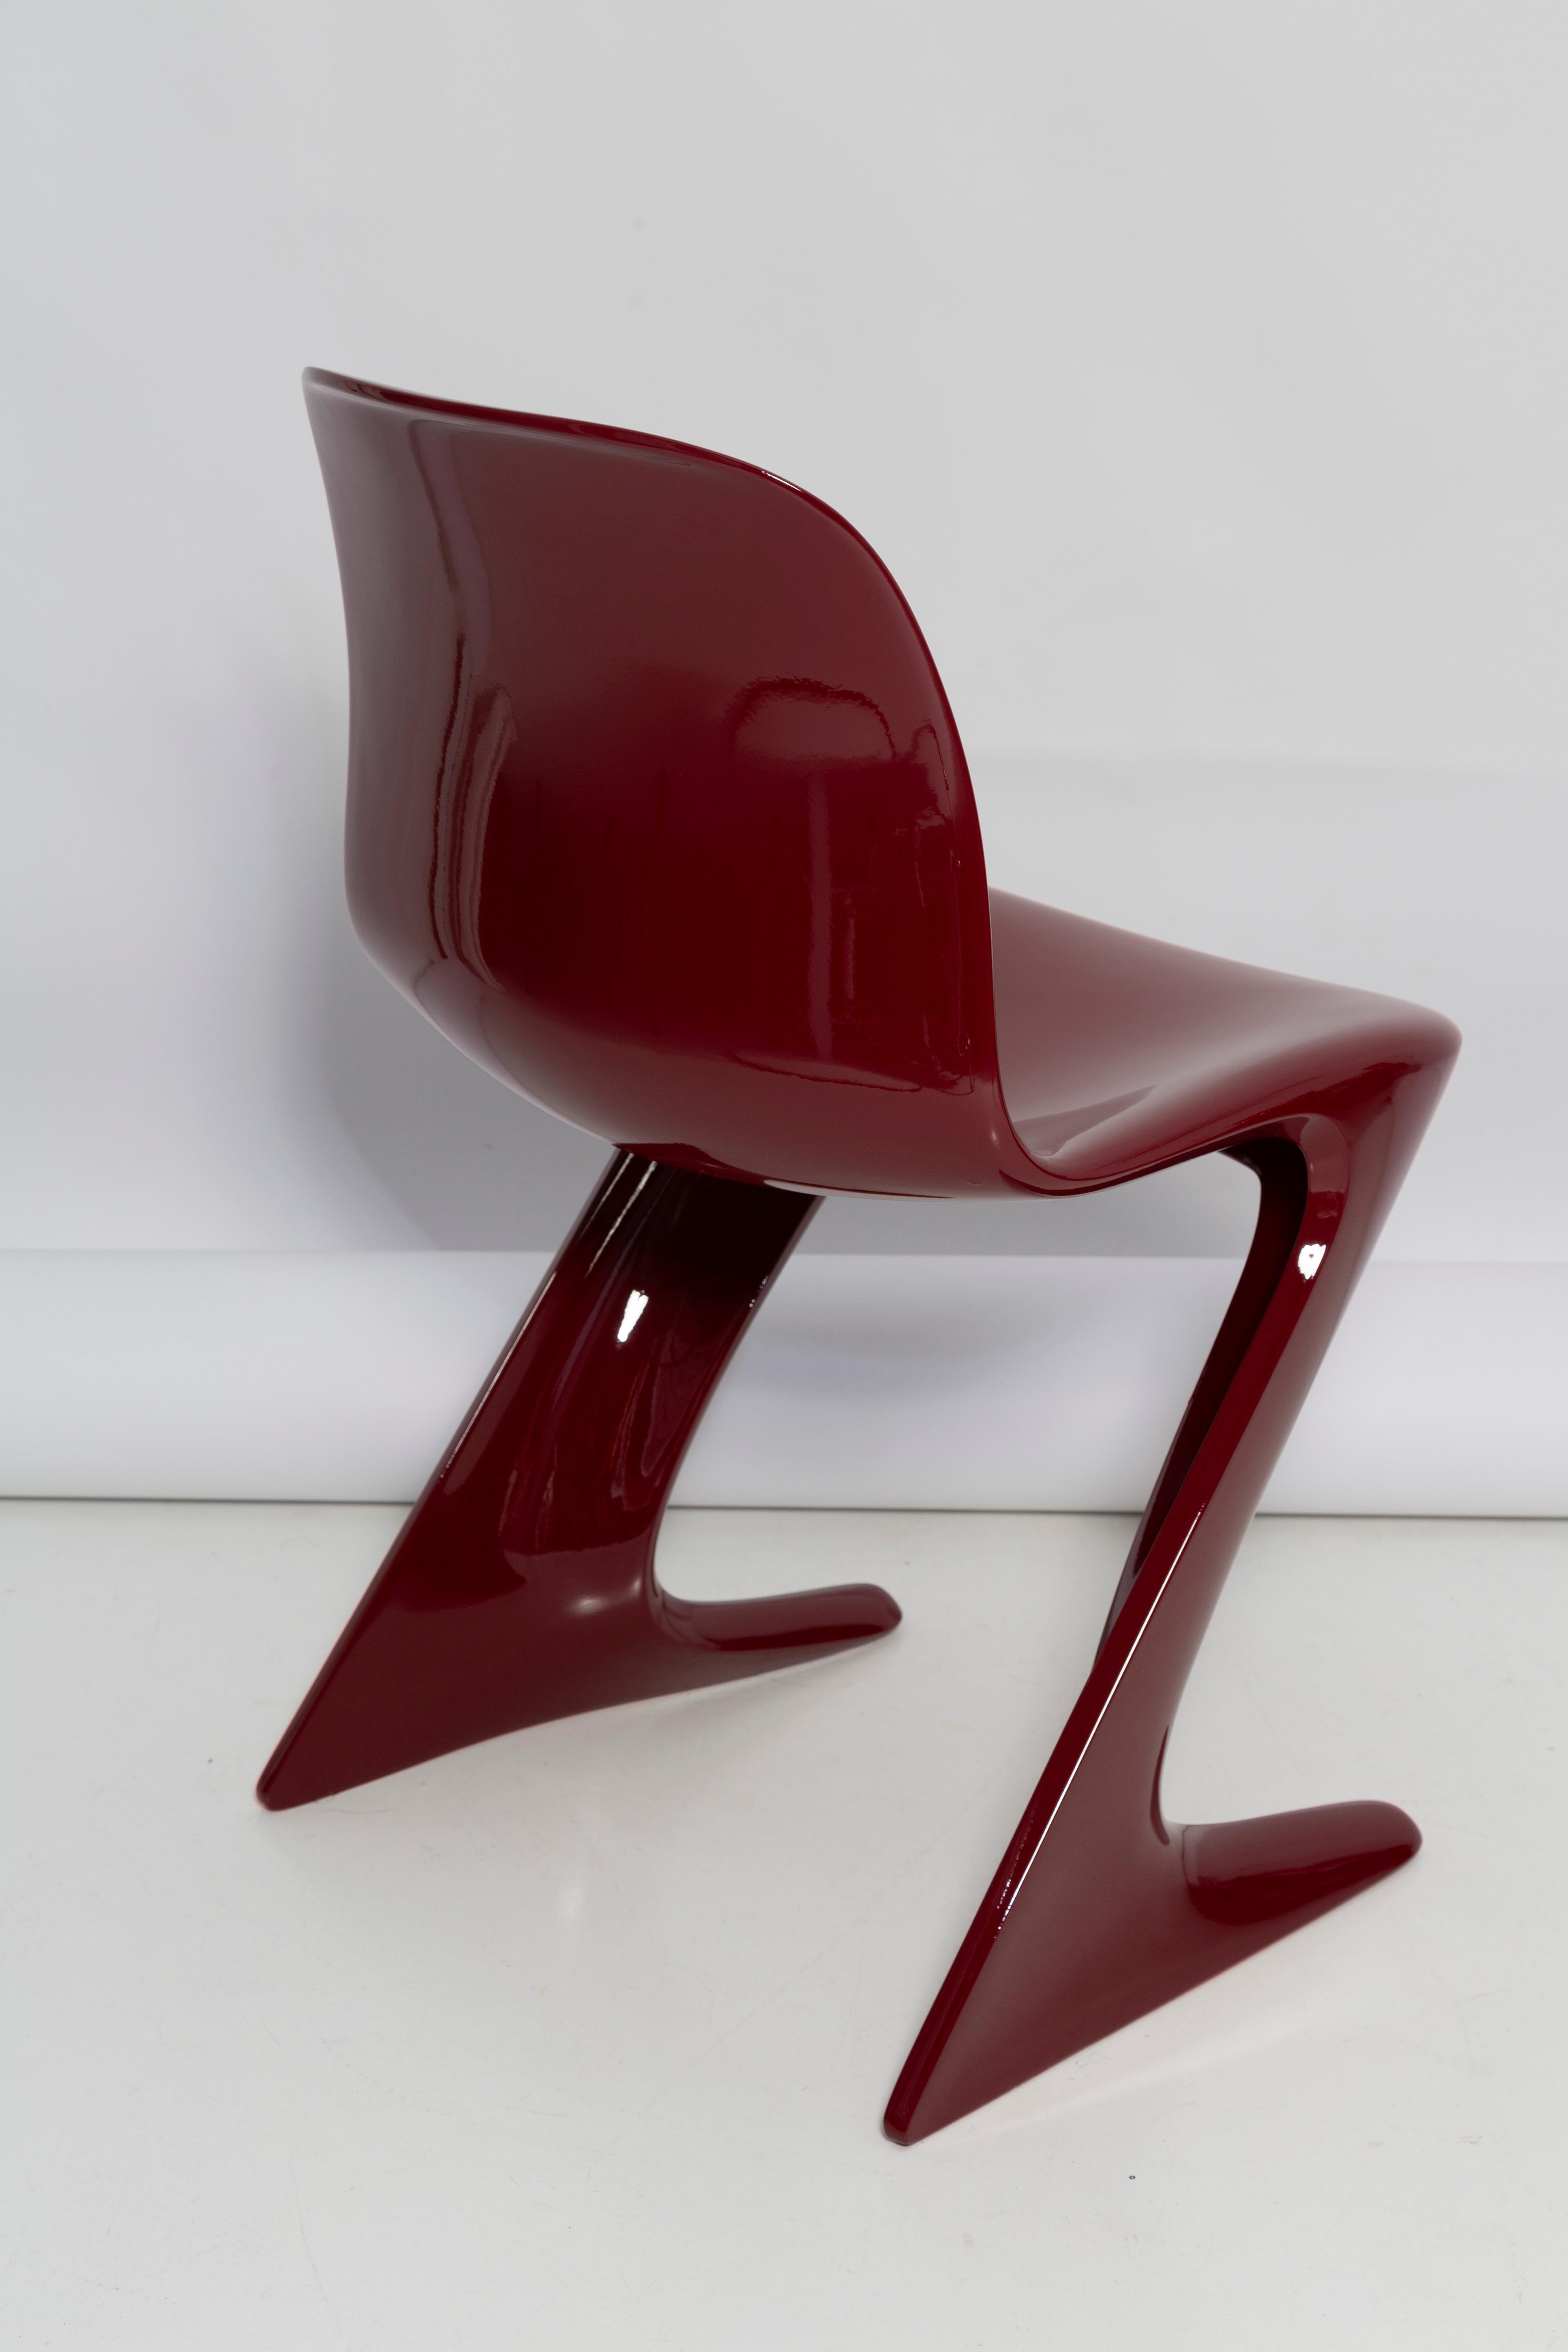 Set of Three Red Wine Kangaroo Chairs Designed by Ernst Moeckl, Germany, 1968 For Sale 1